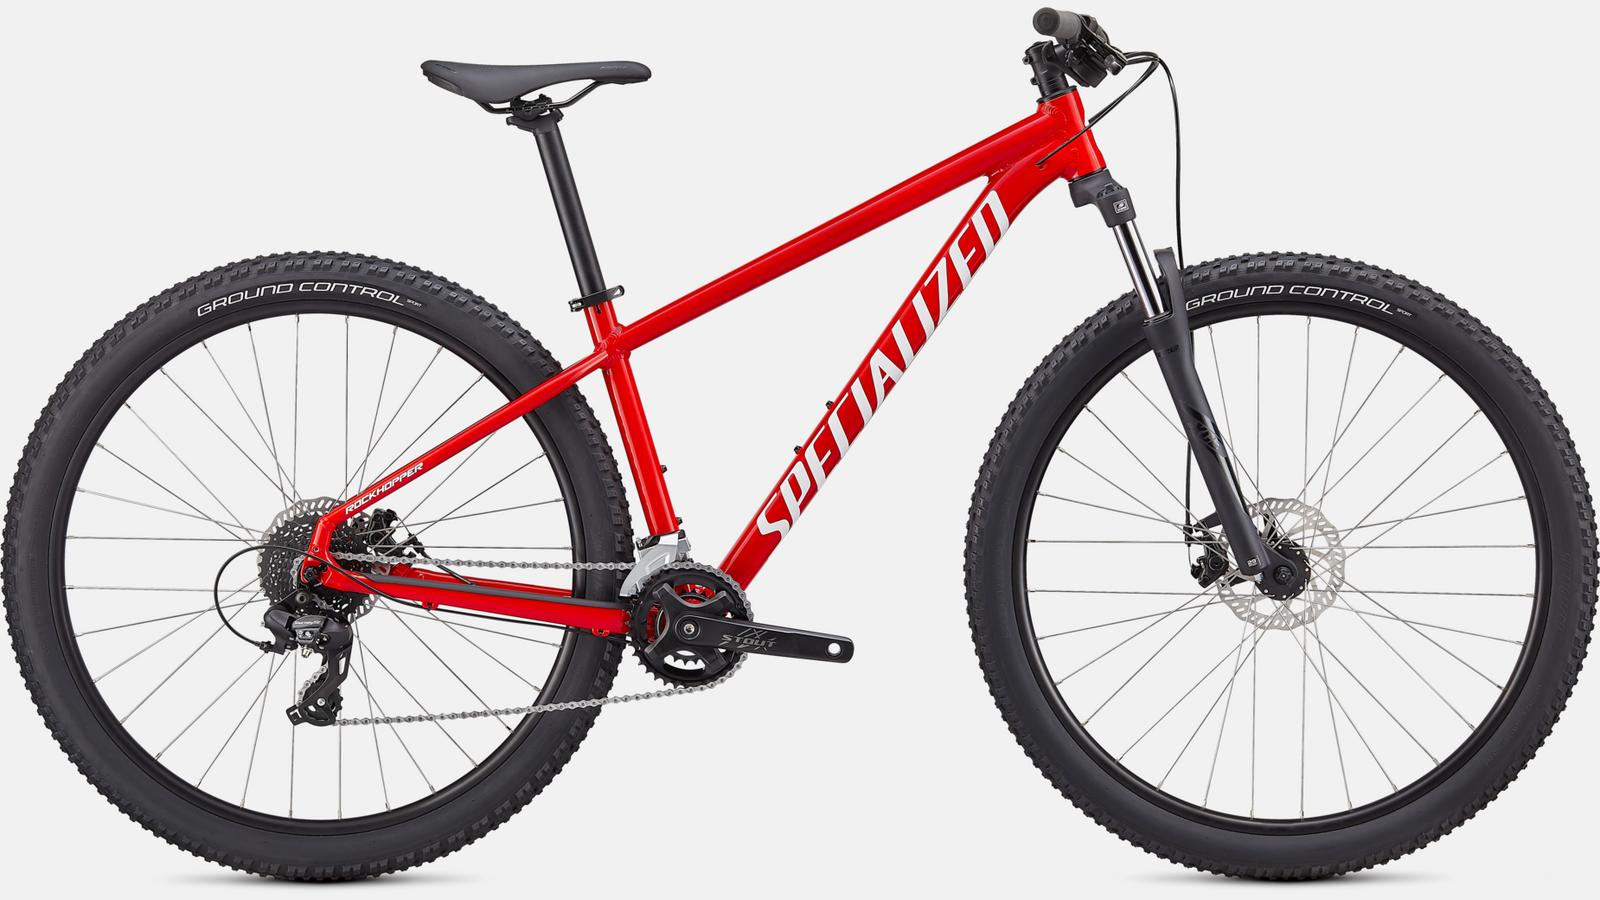 Paint for 2021 Specialized Rockhopper - Gloss Flo Red